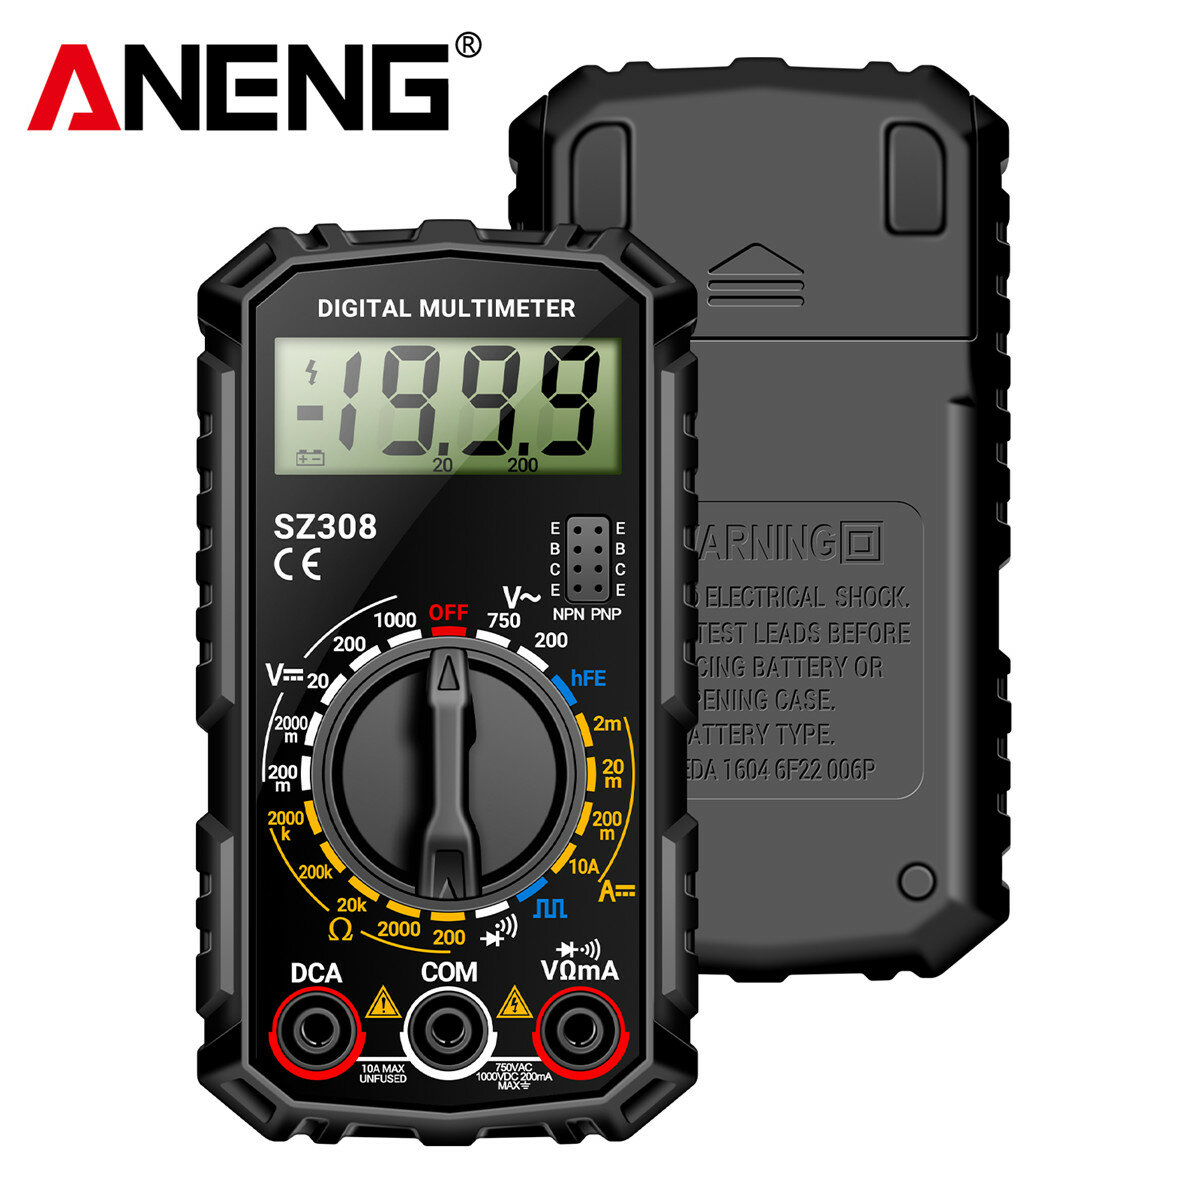 

ANENG Professional Digital Multimeter High Precision AC/DC Voltage Current Resistance Tester with Low Battery Indication